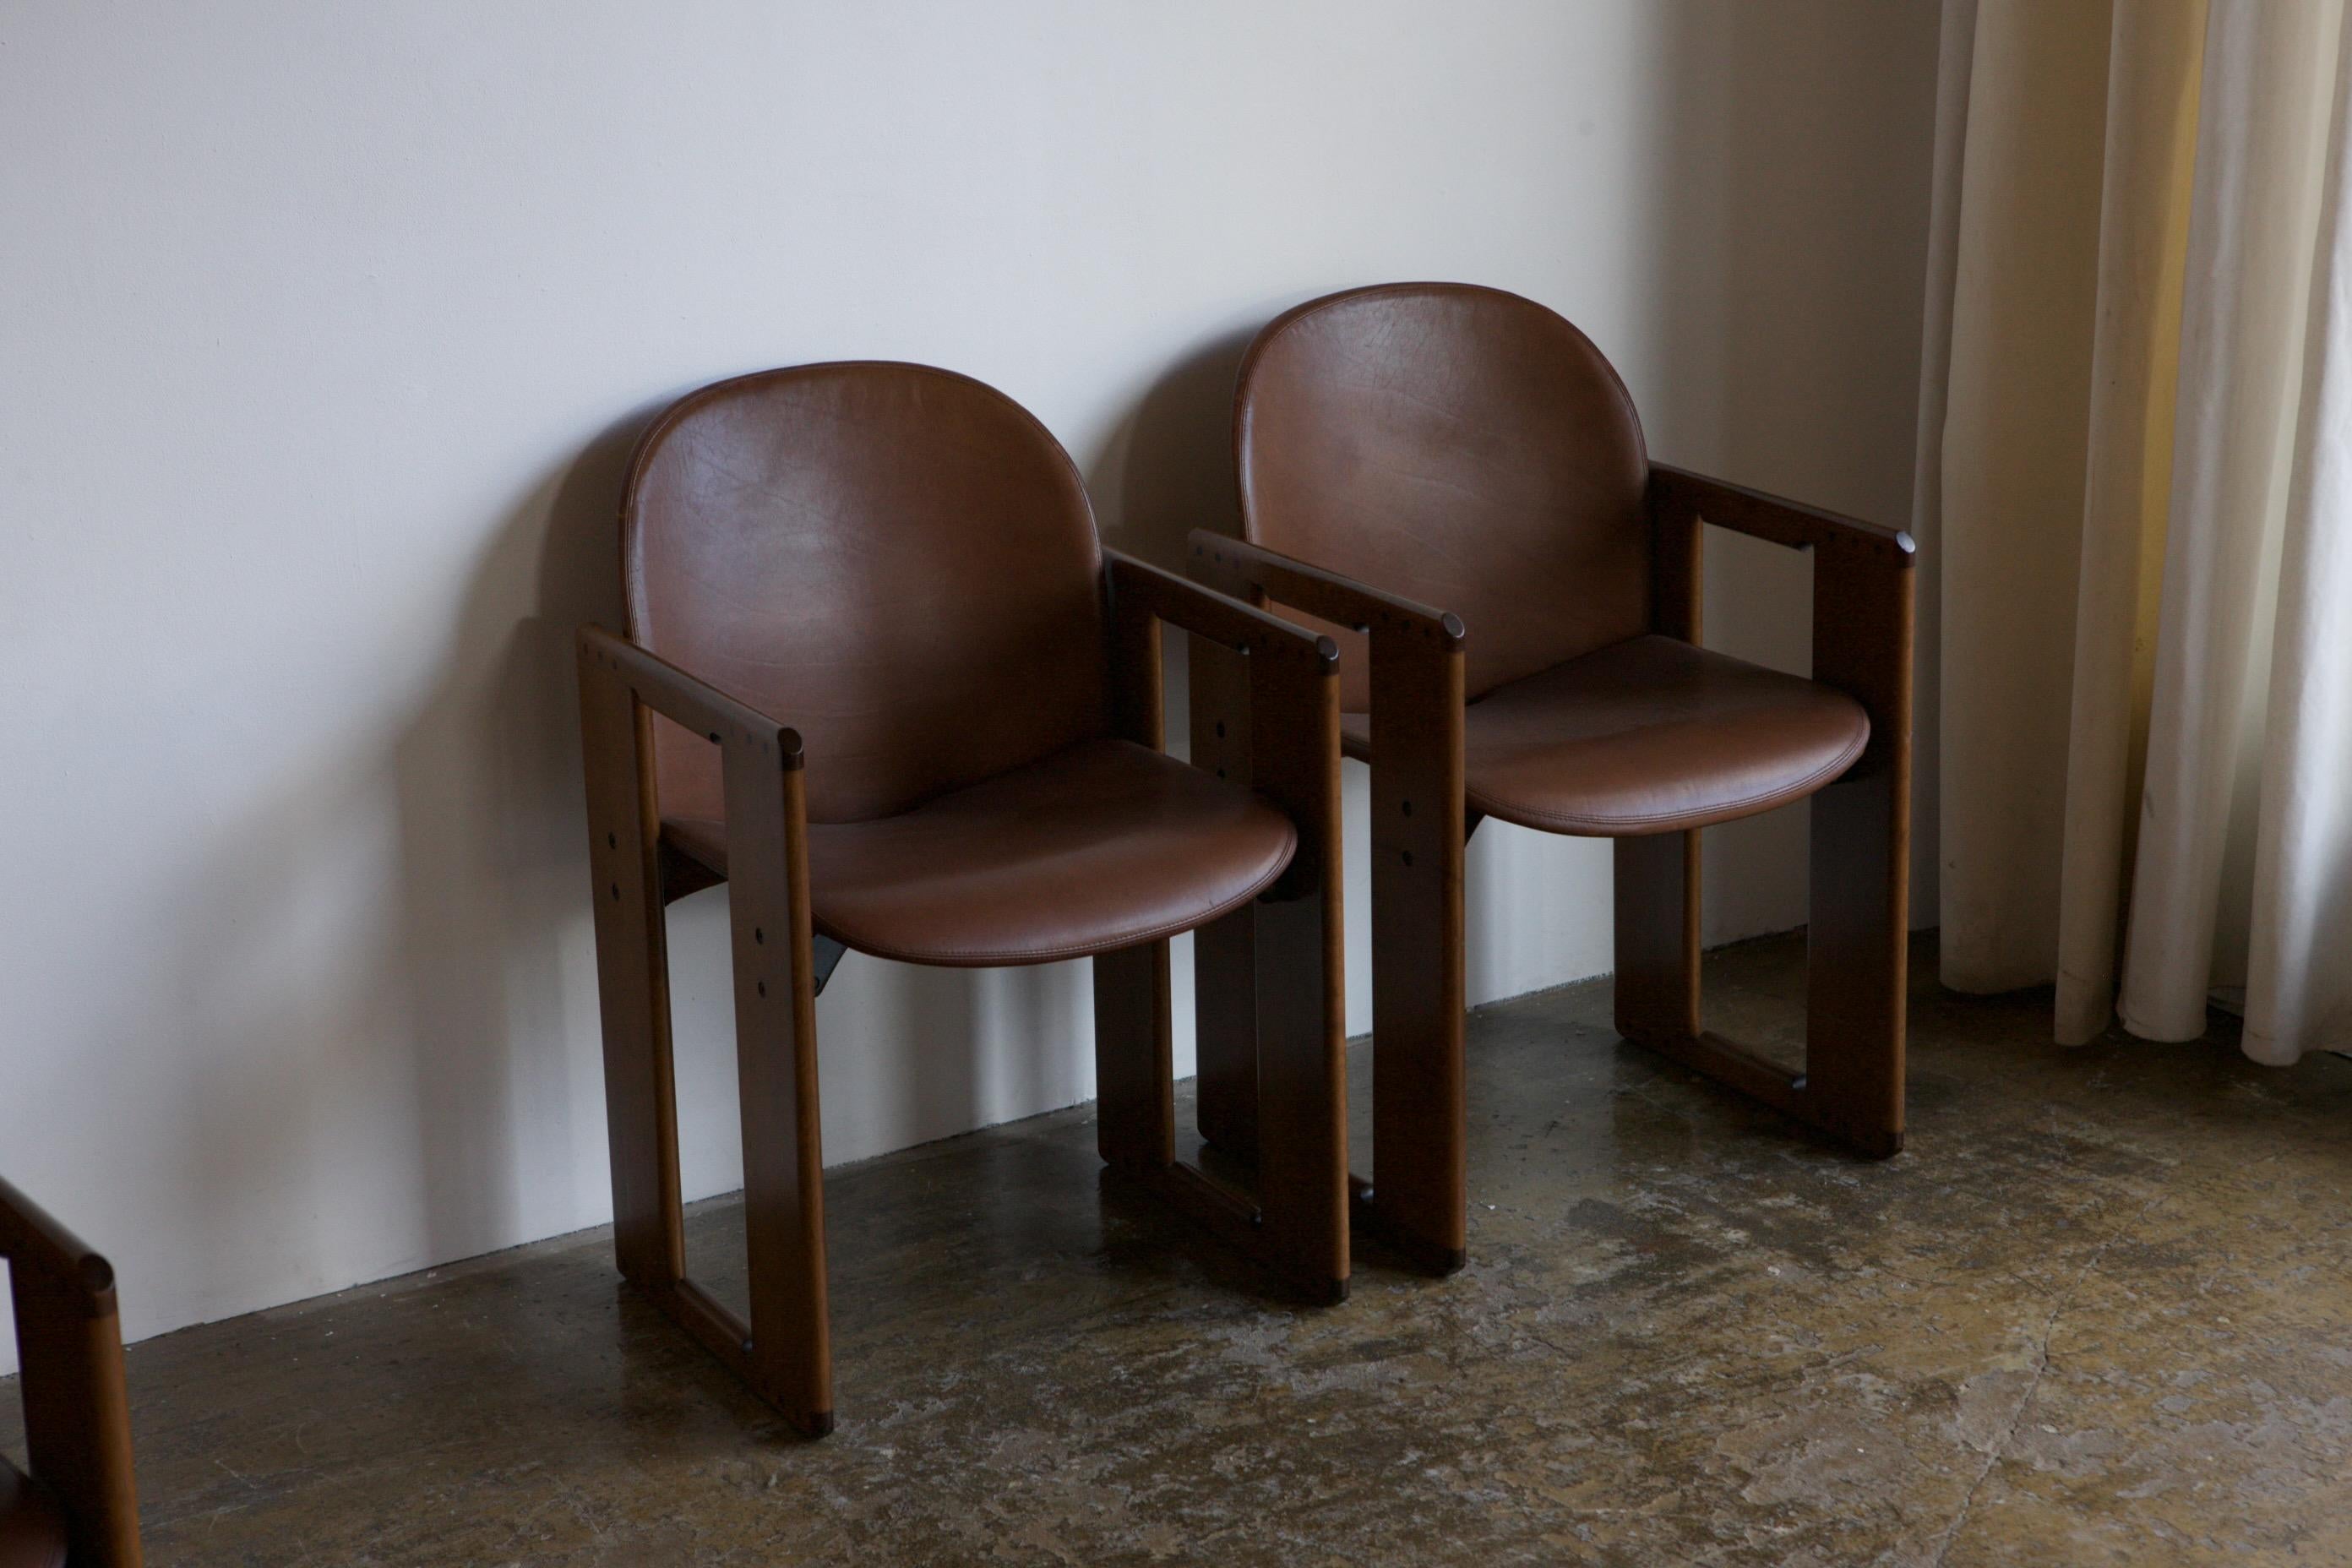 An iconic and much sought after design, the Dialogo dining chair was designed in 1974 by Afra and Tobia Scarpa for BB Italia. This one is in beautiful condition, the cognac leather has been extremely well looked after, as has the wood and joints.